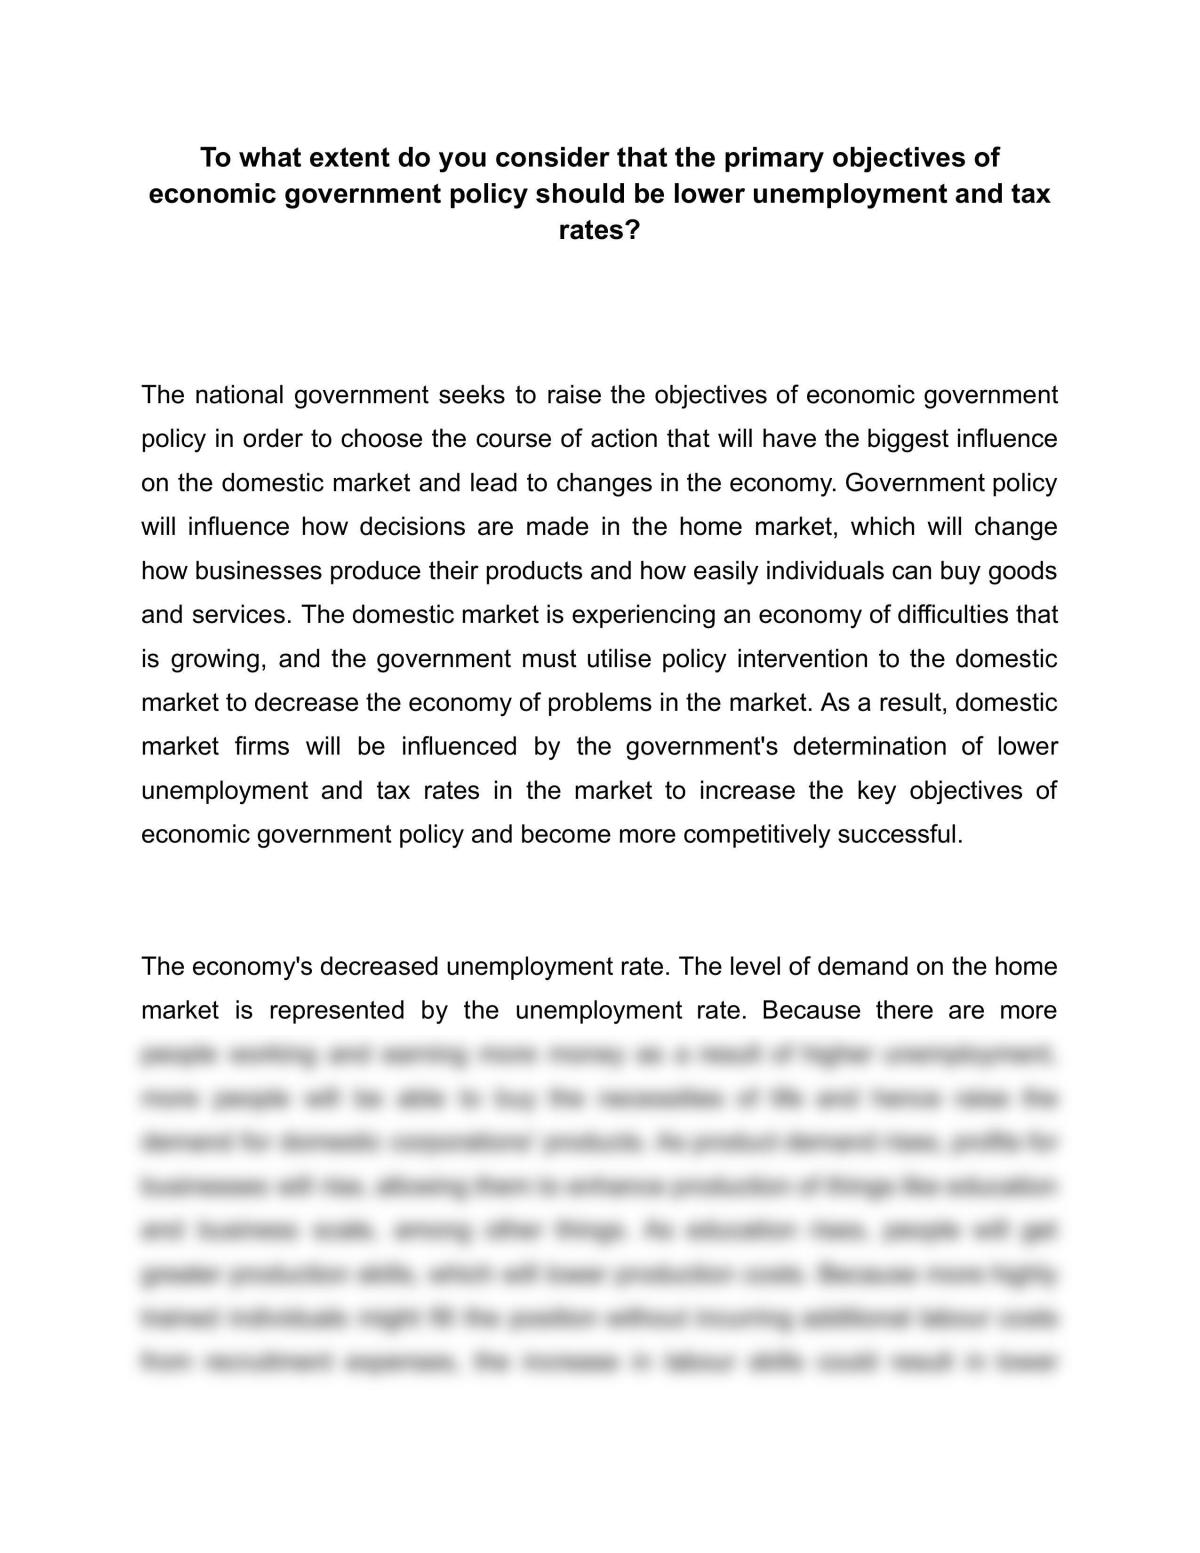 Low unemployment and low tax rates increase the objectives of government economic policy. - Page 1